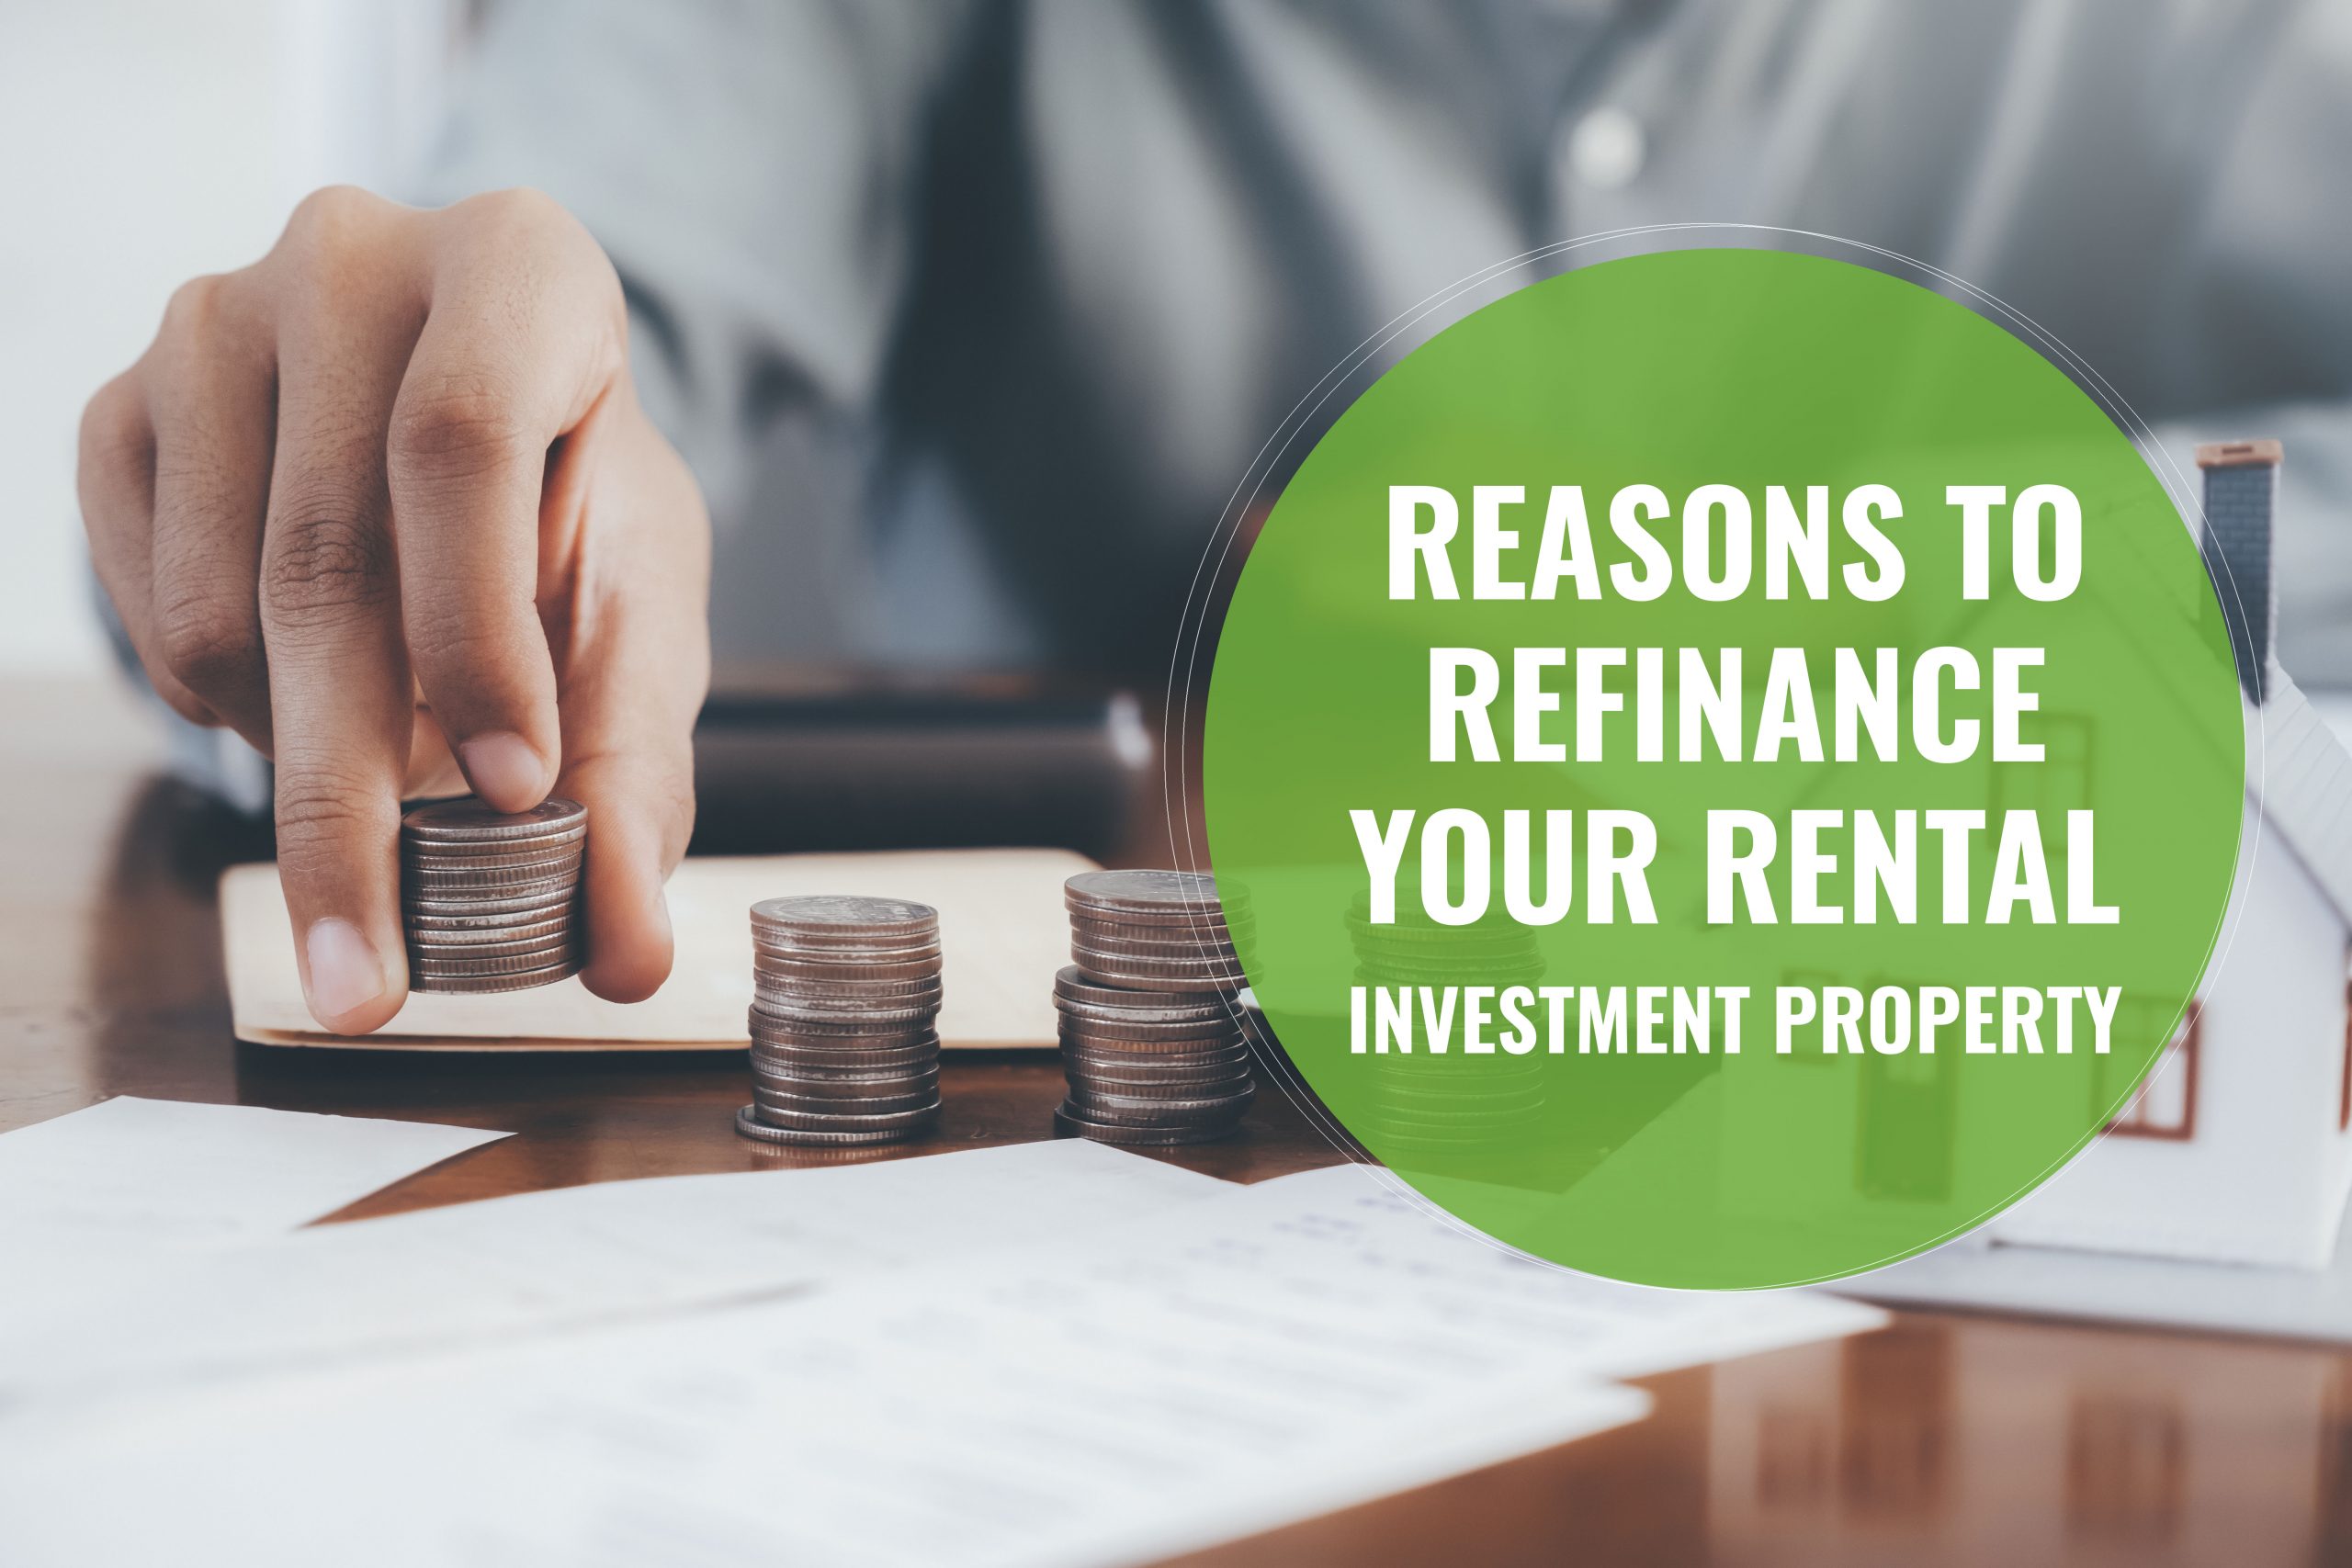 Reasons to Refinance Your Rental Investment Property